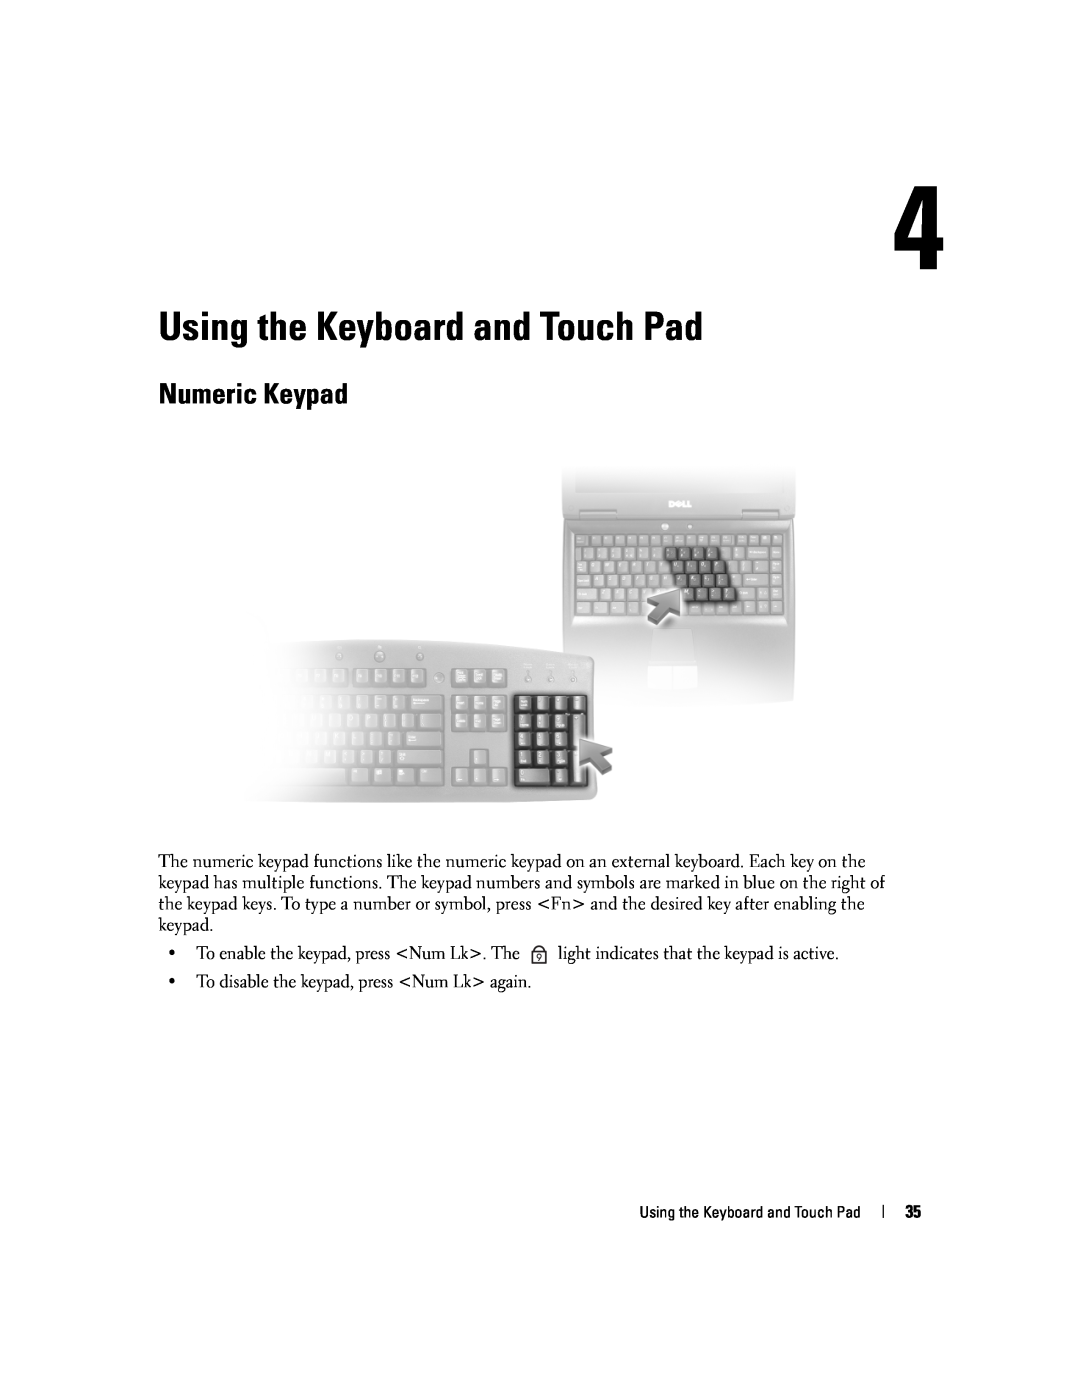 Dell PP20L owner manual Using the Keyboard and Touch Pad, Numeric Keypad 